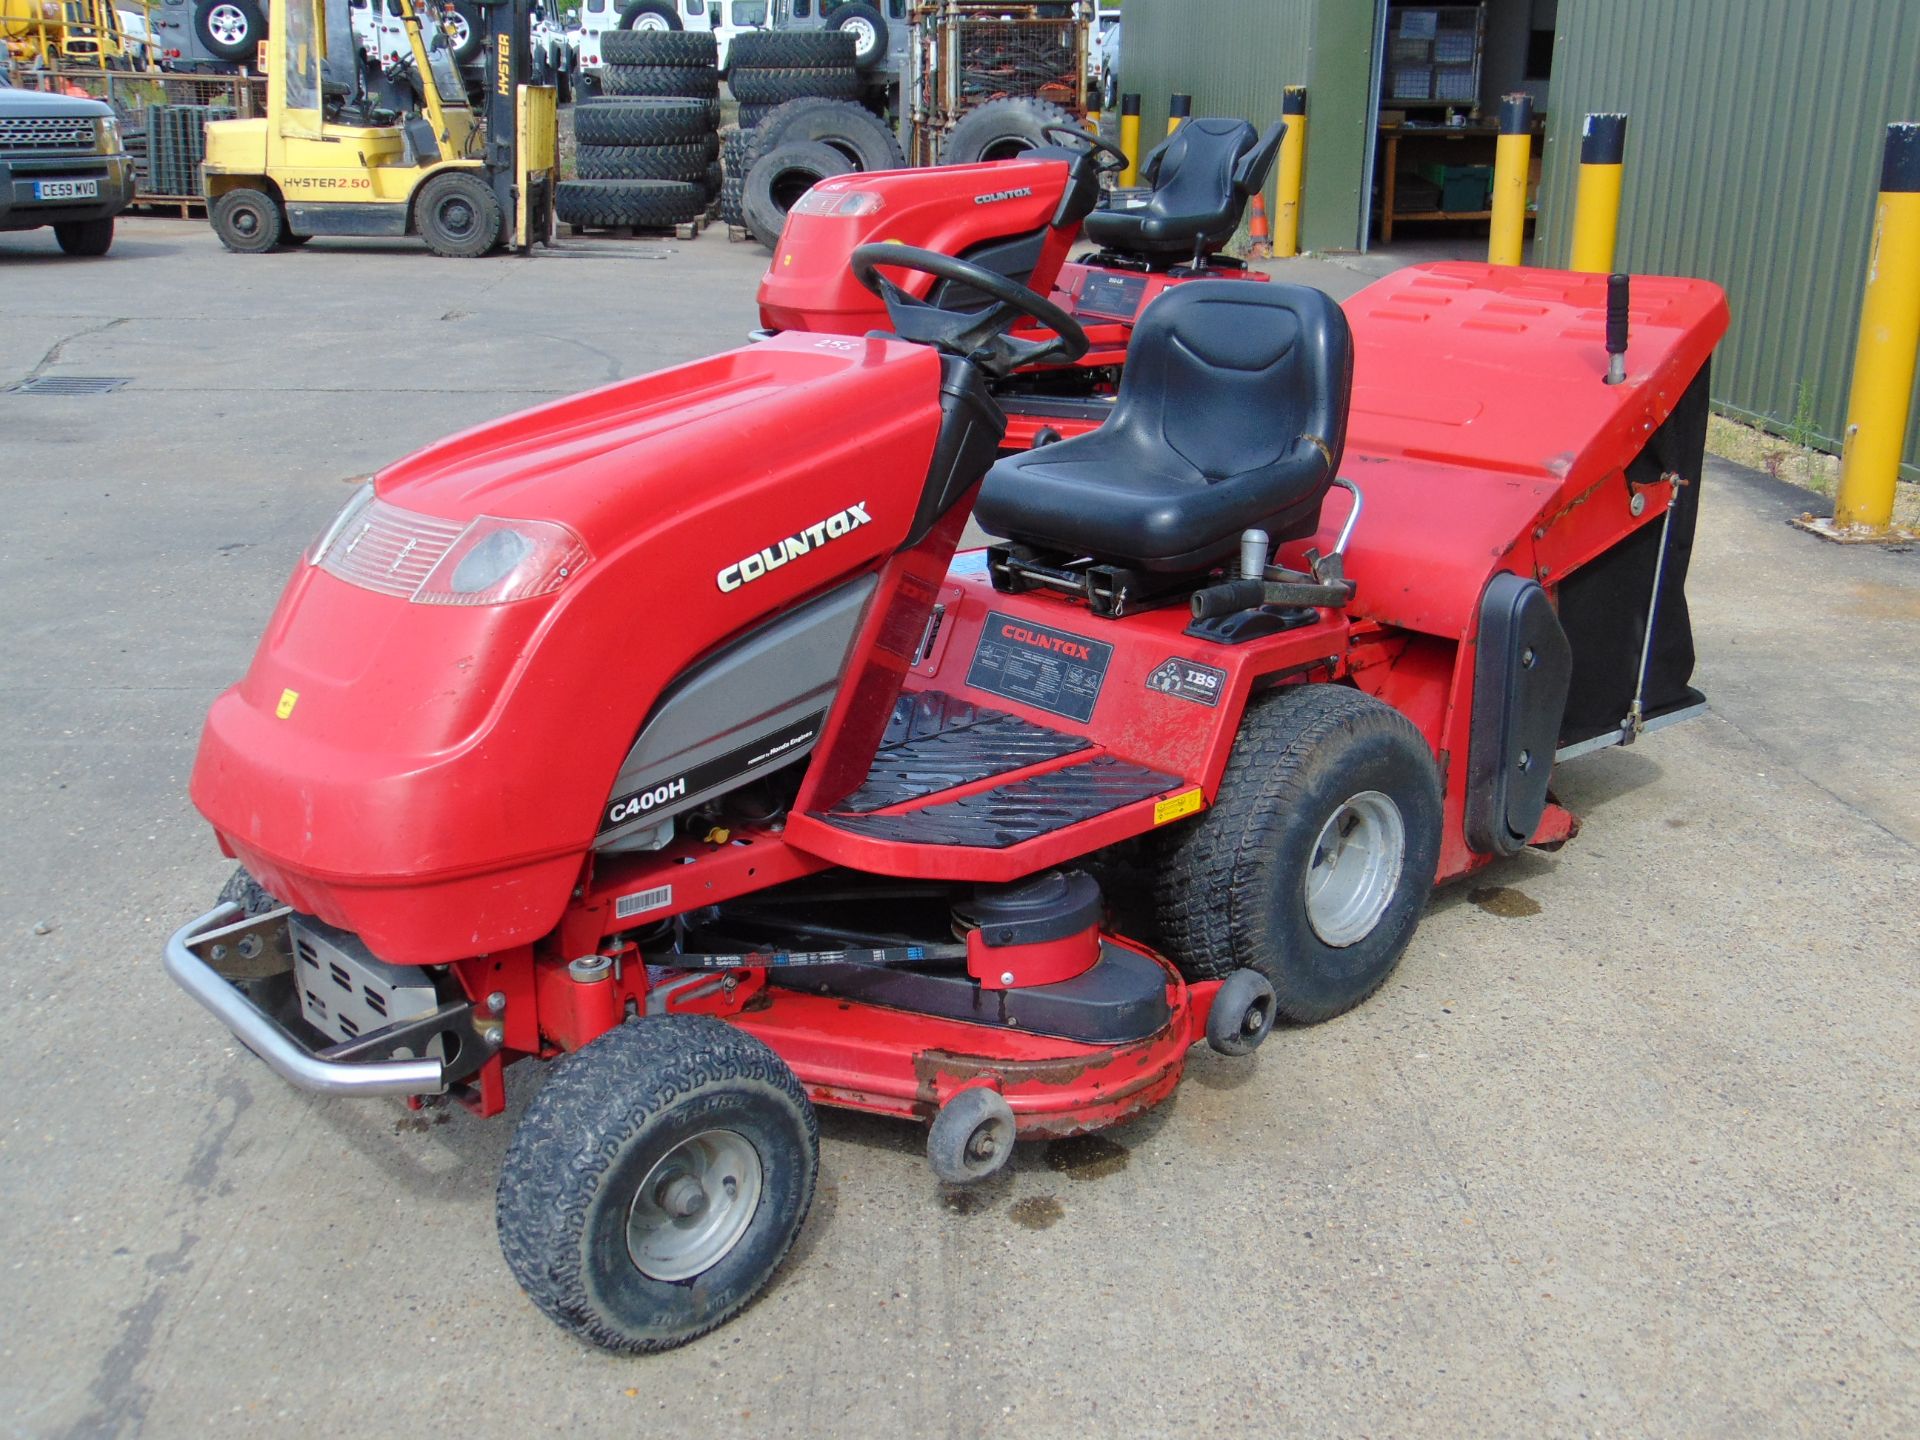 Countax C400H Ride On Mower / Lawn Tractor - Image 3 of 13